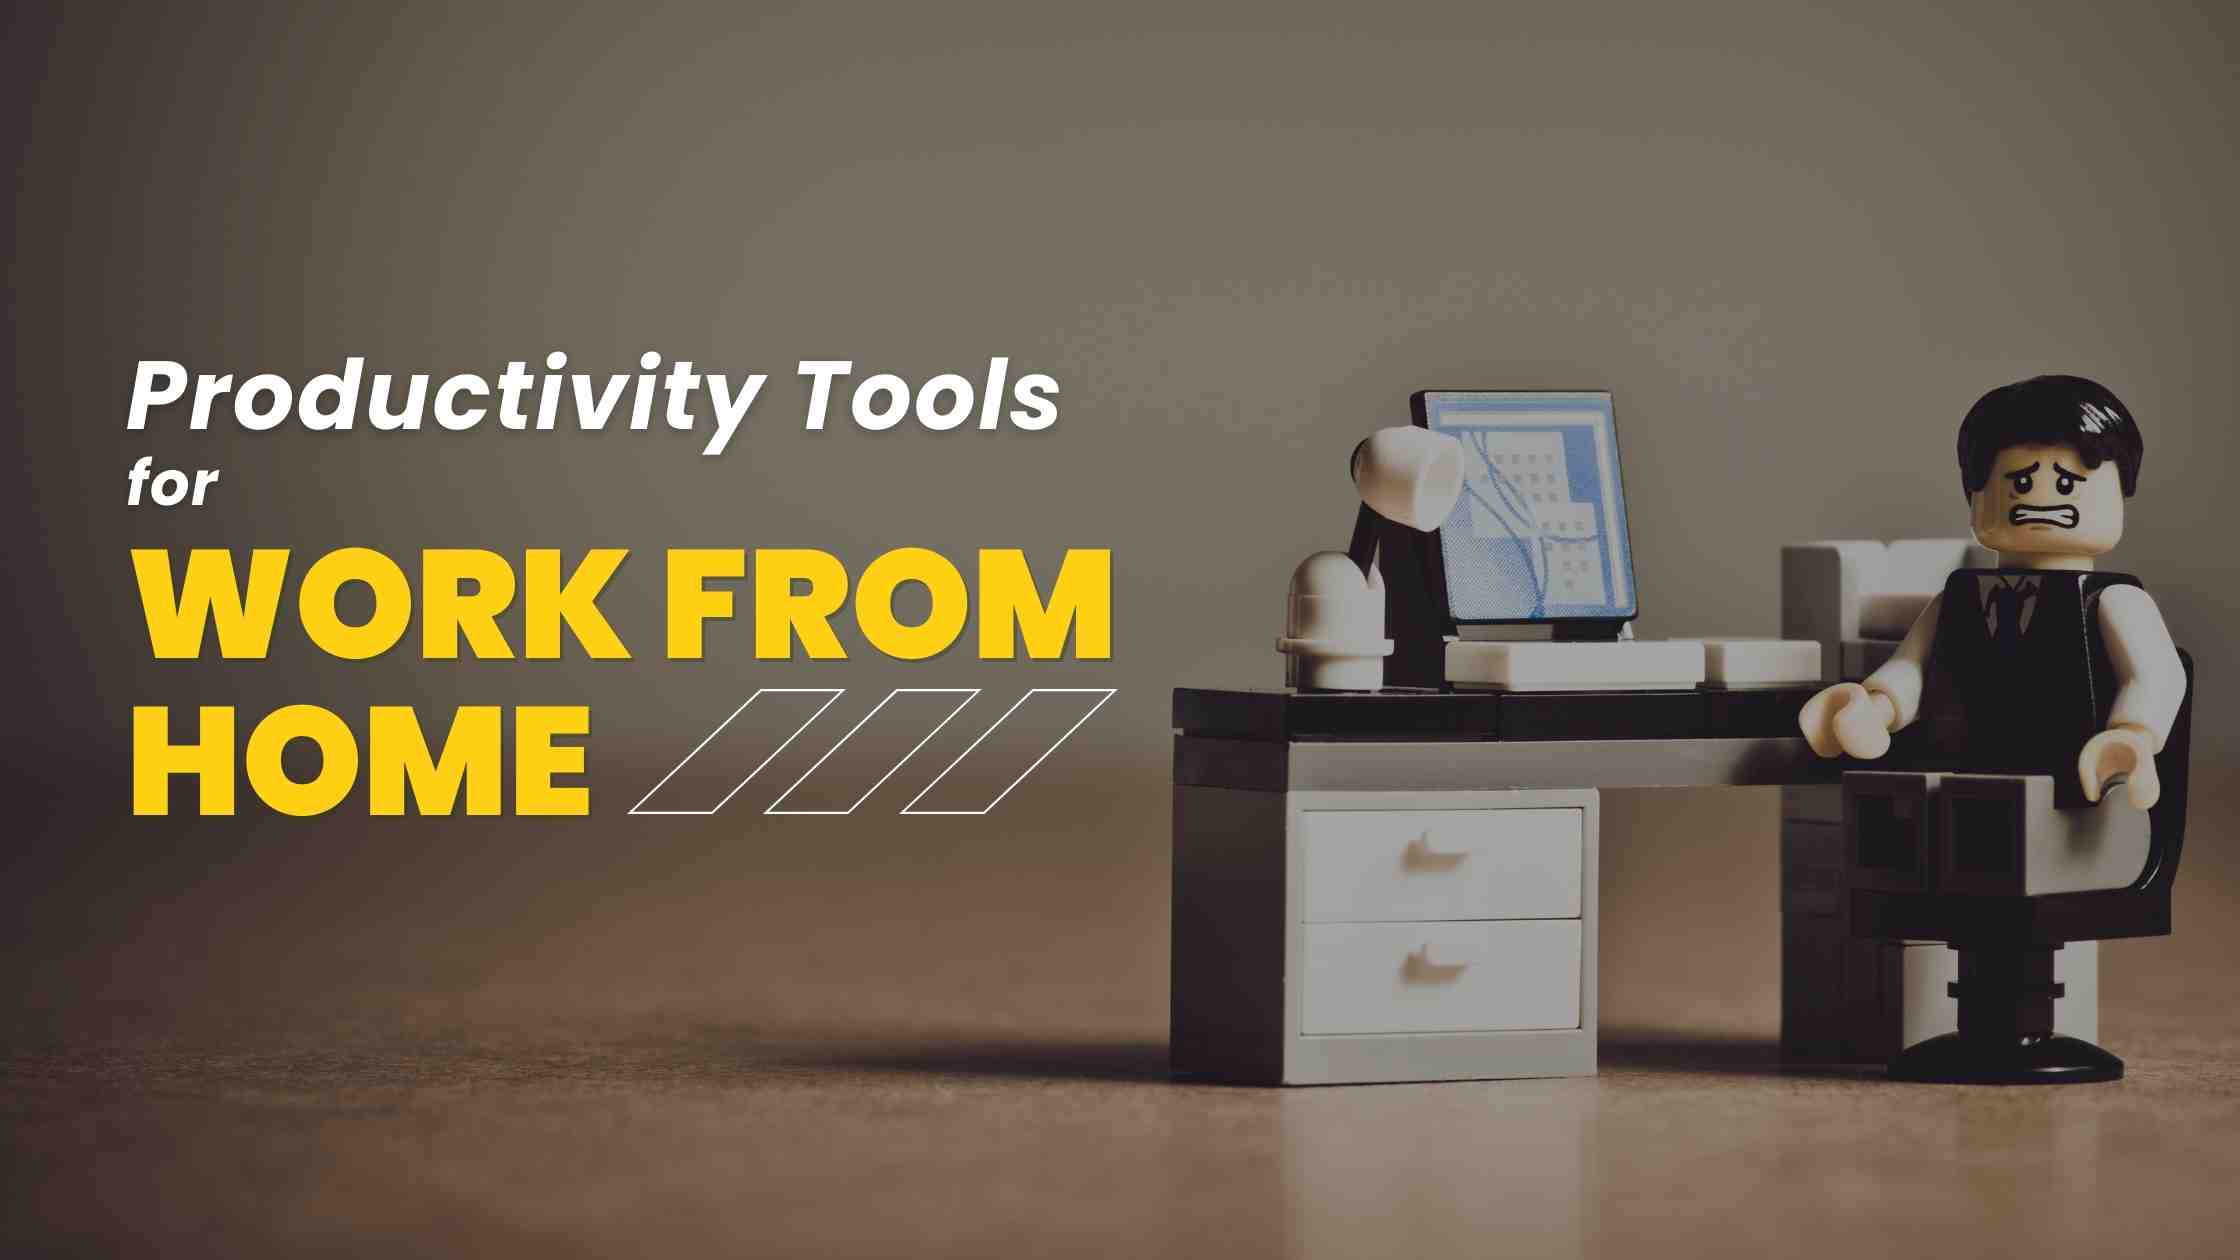 10 Online Productivity Tools for This Work From Home Season 💻